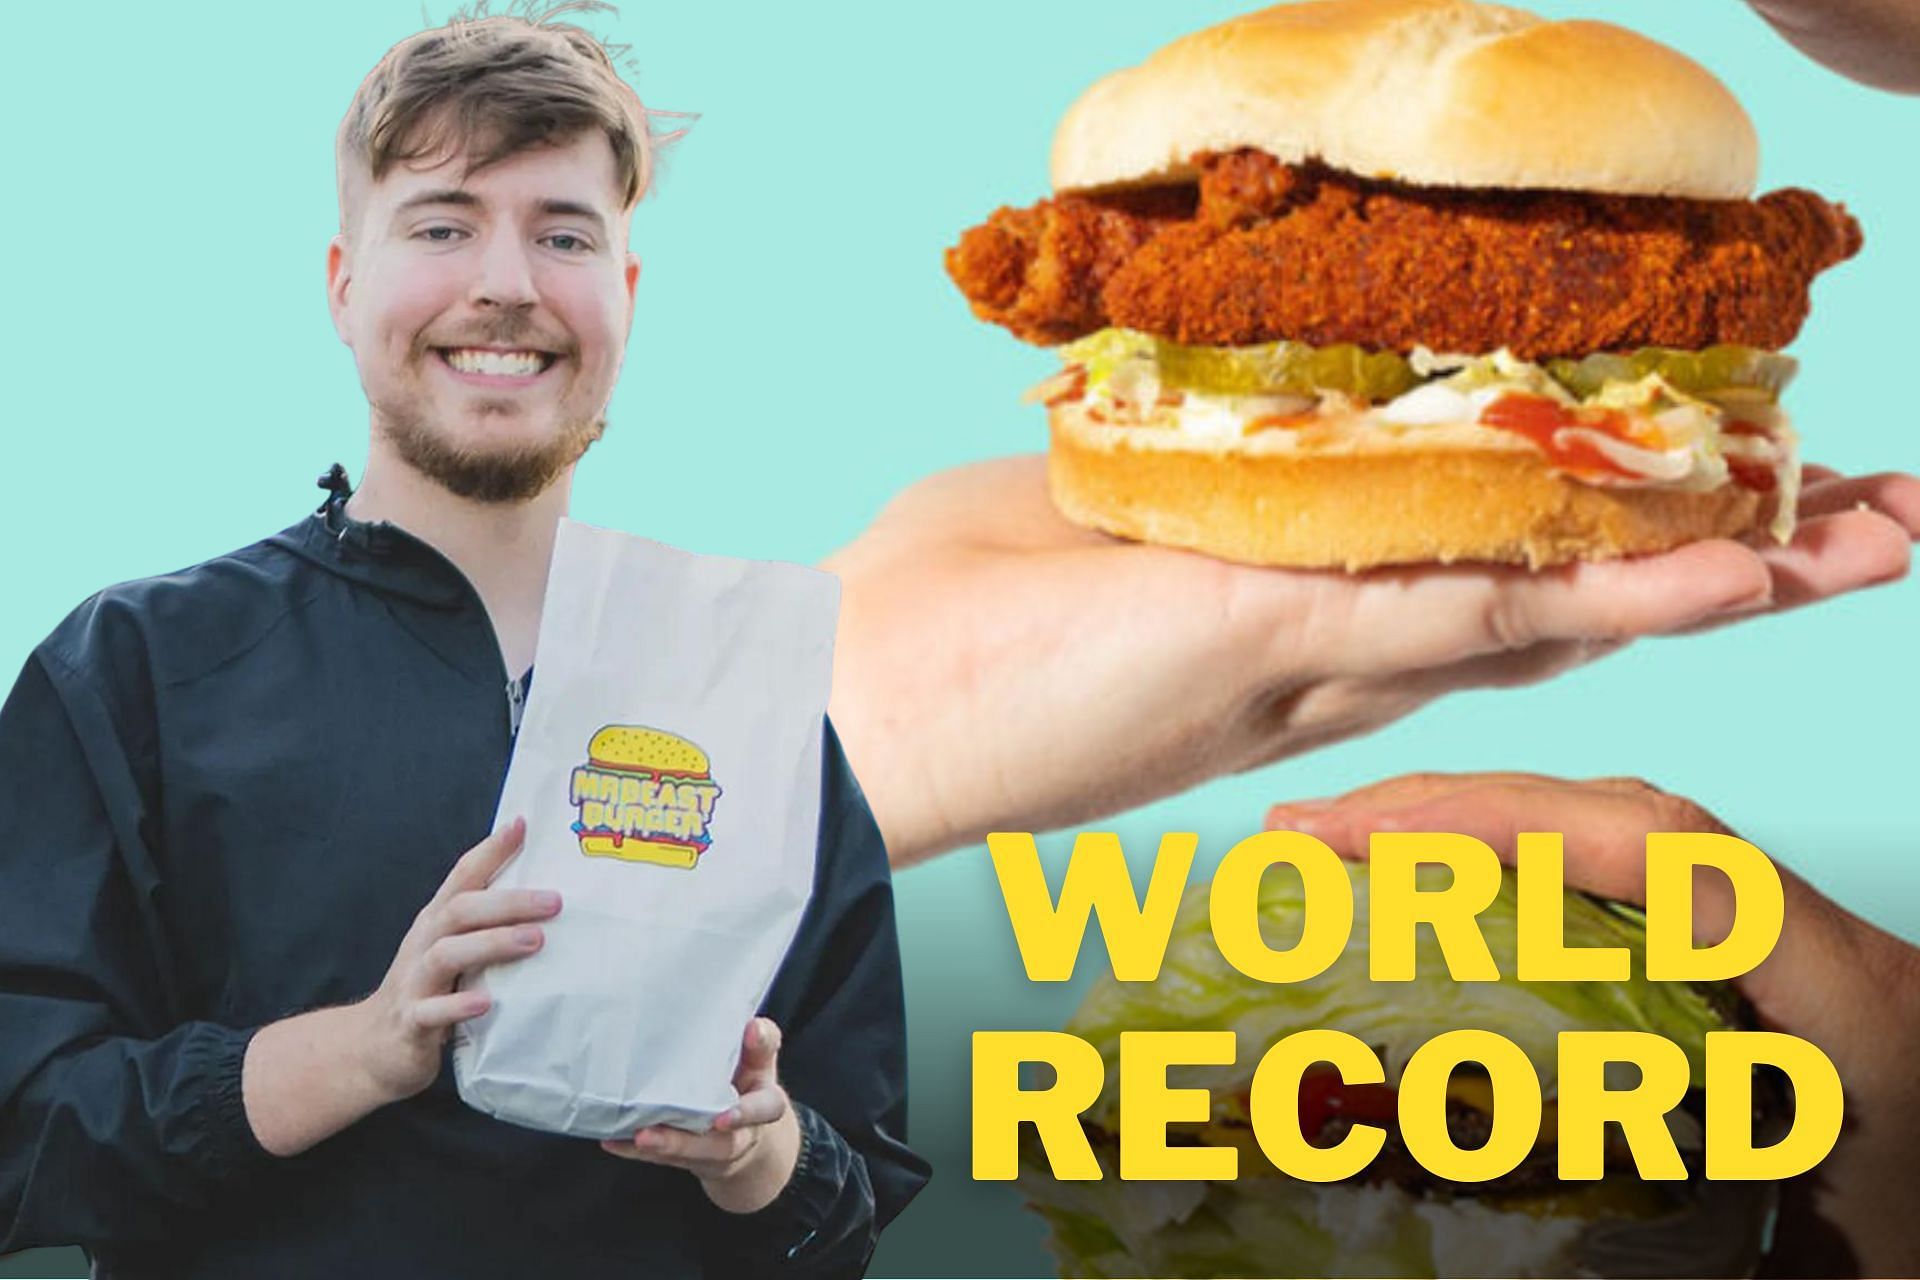 I Worked at MrBeast Burger For a Day 